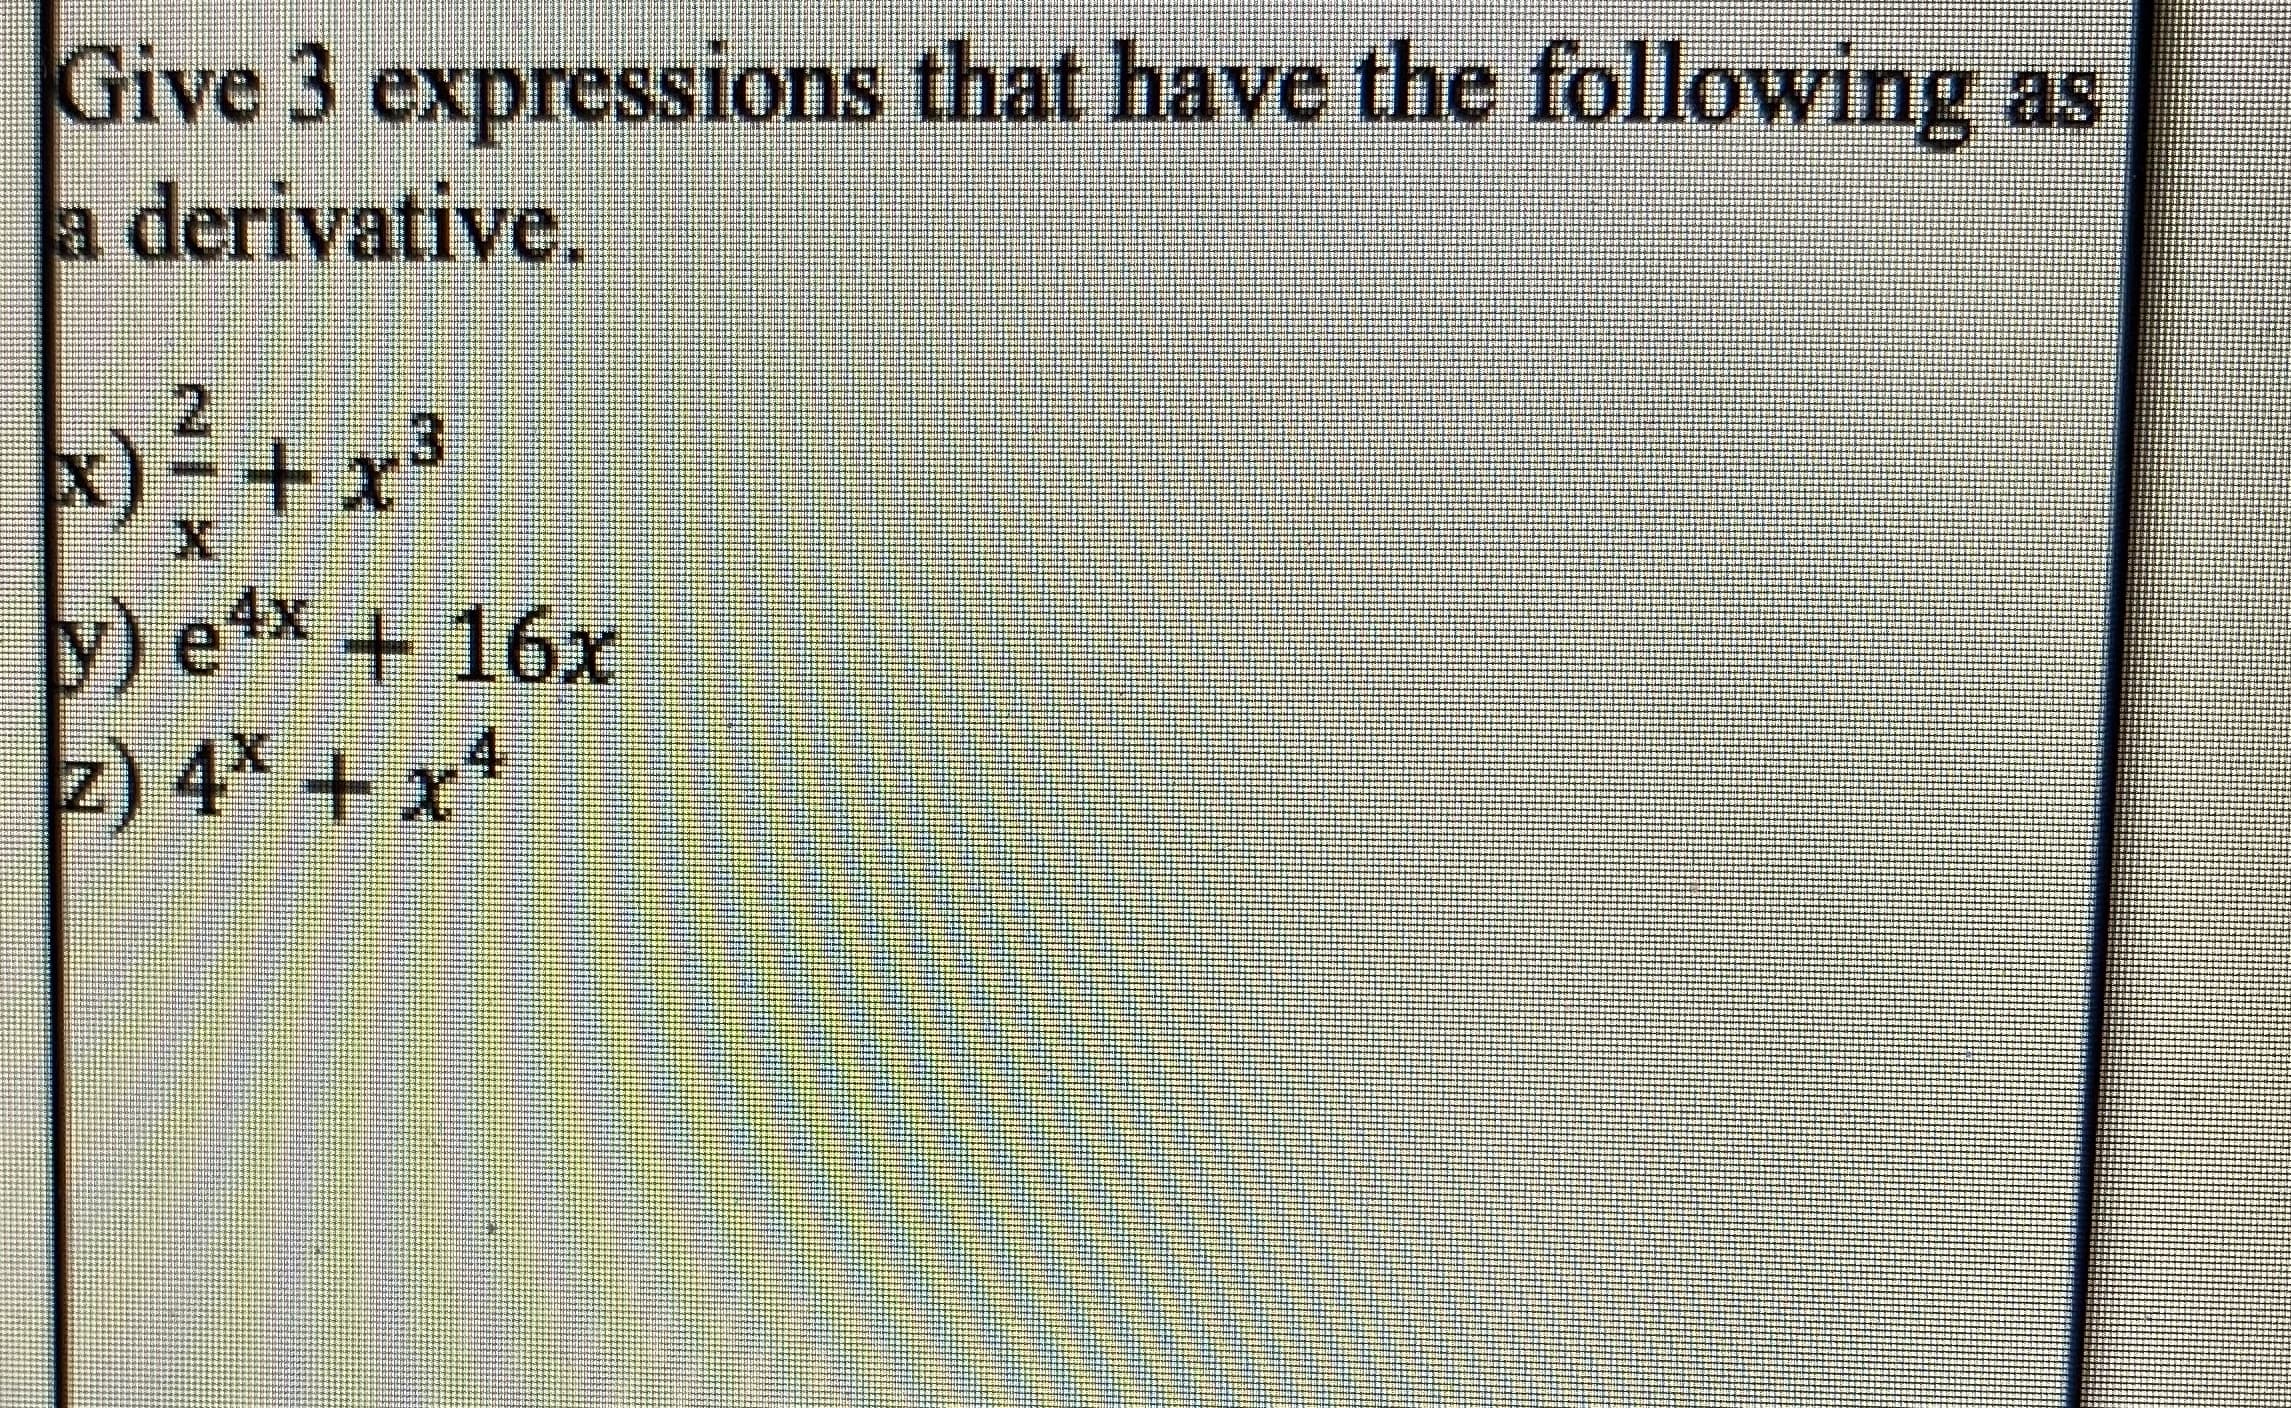 Give 3 expressions that have the following as
a derivative.
x) +x²
